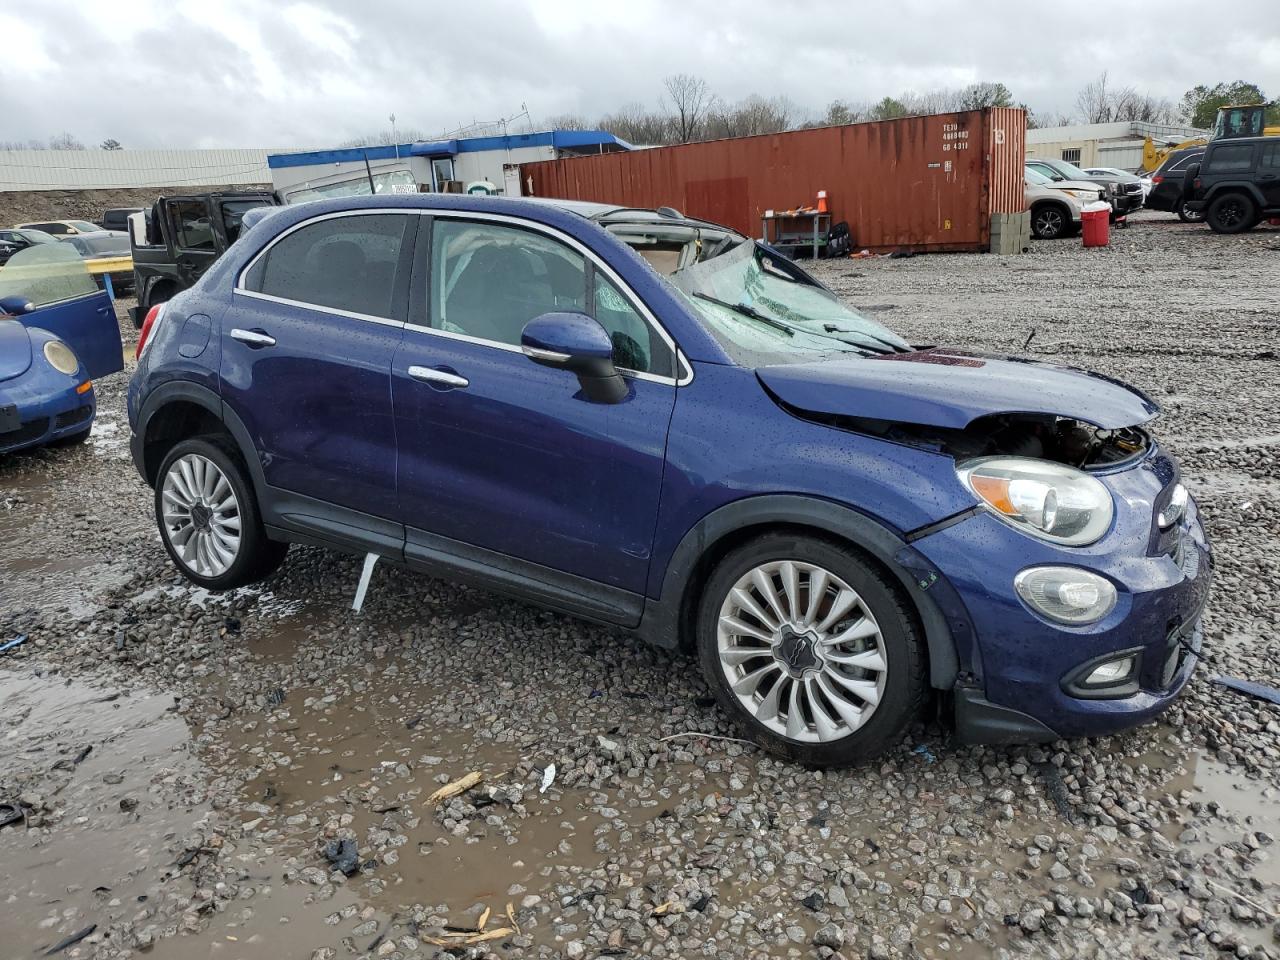 ZFBCFXDT5GP****** Salvage and Wrecked 2016 Fiat 500X in Alabama State